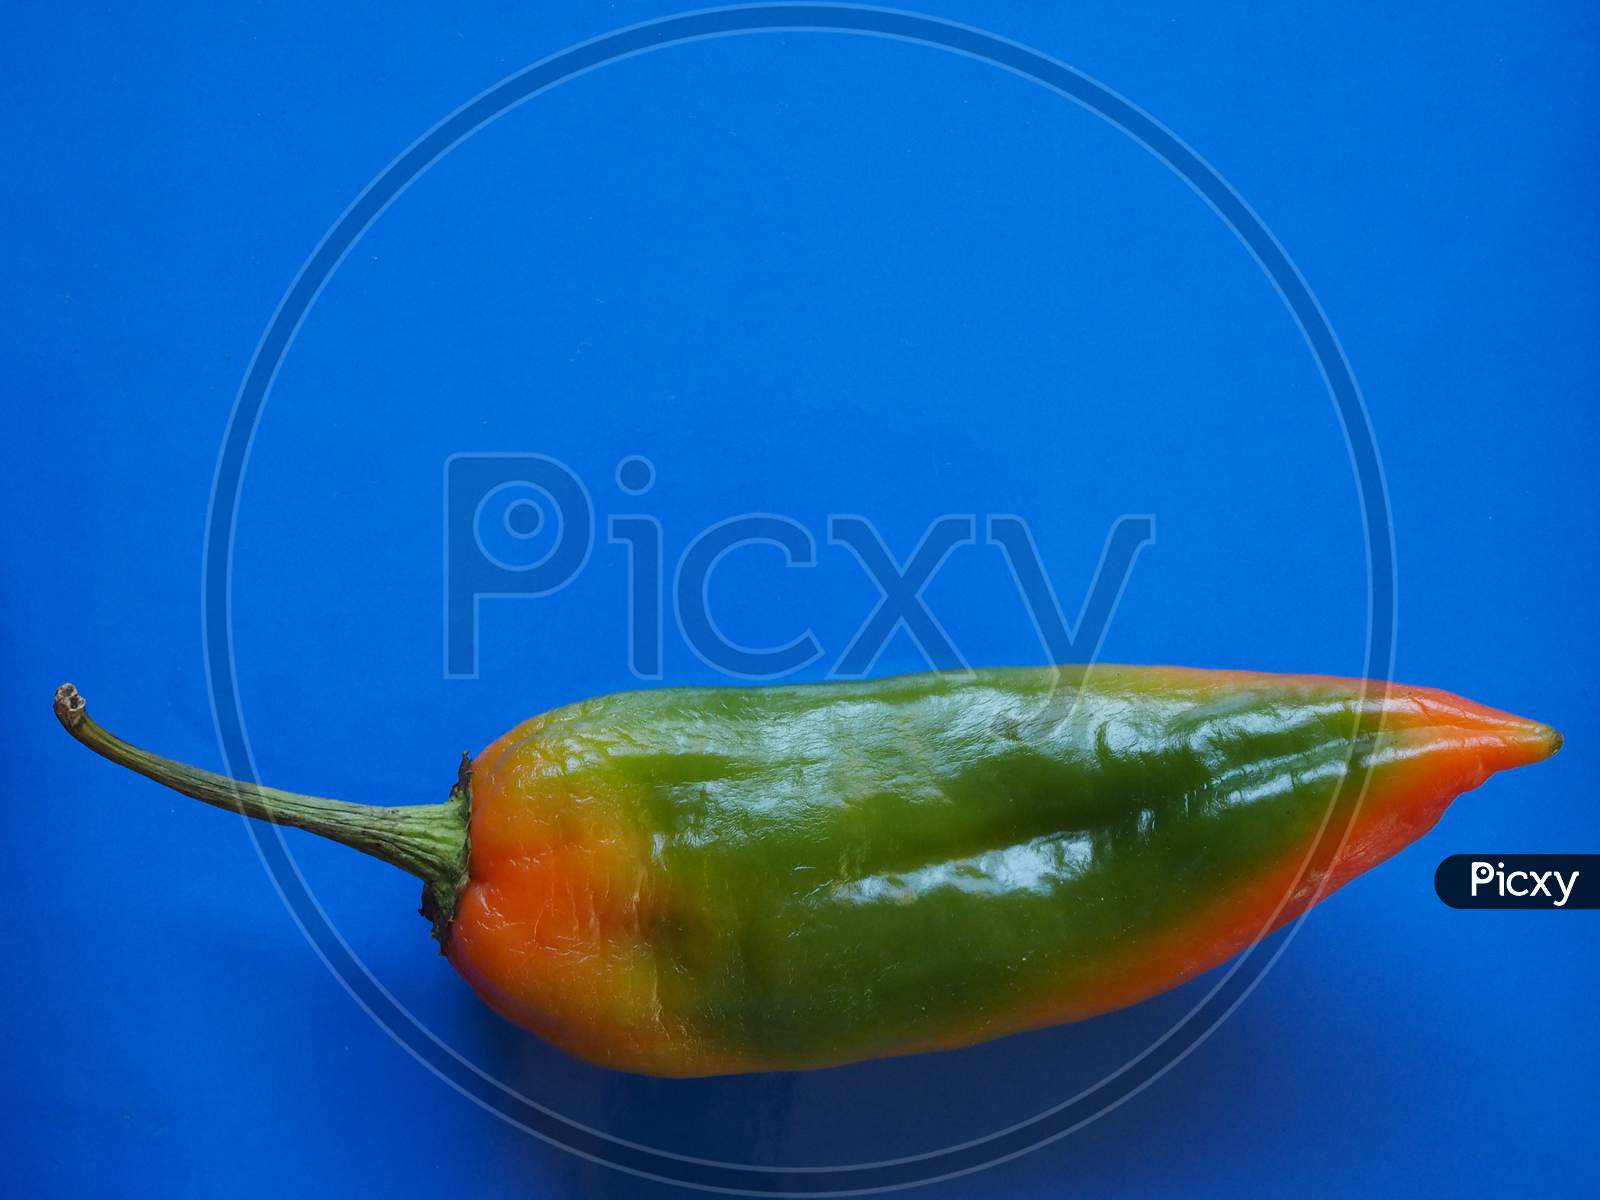 Peppers Vegetable Over Blue With Copy Space